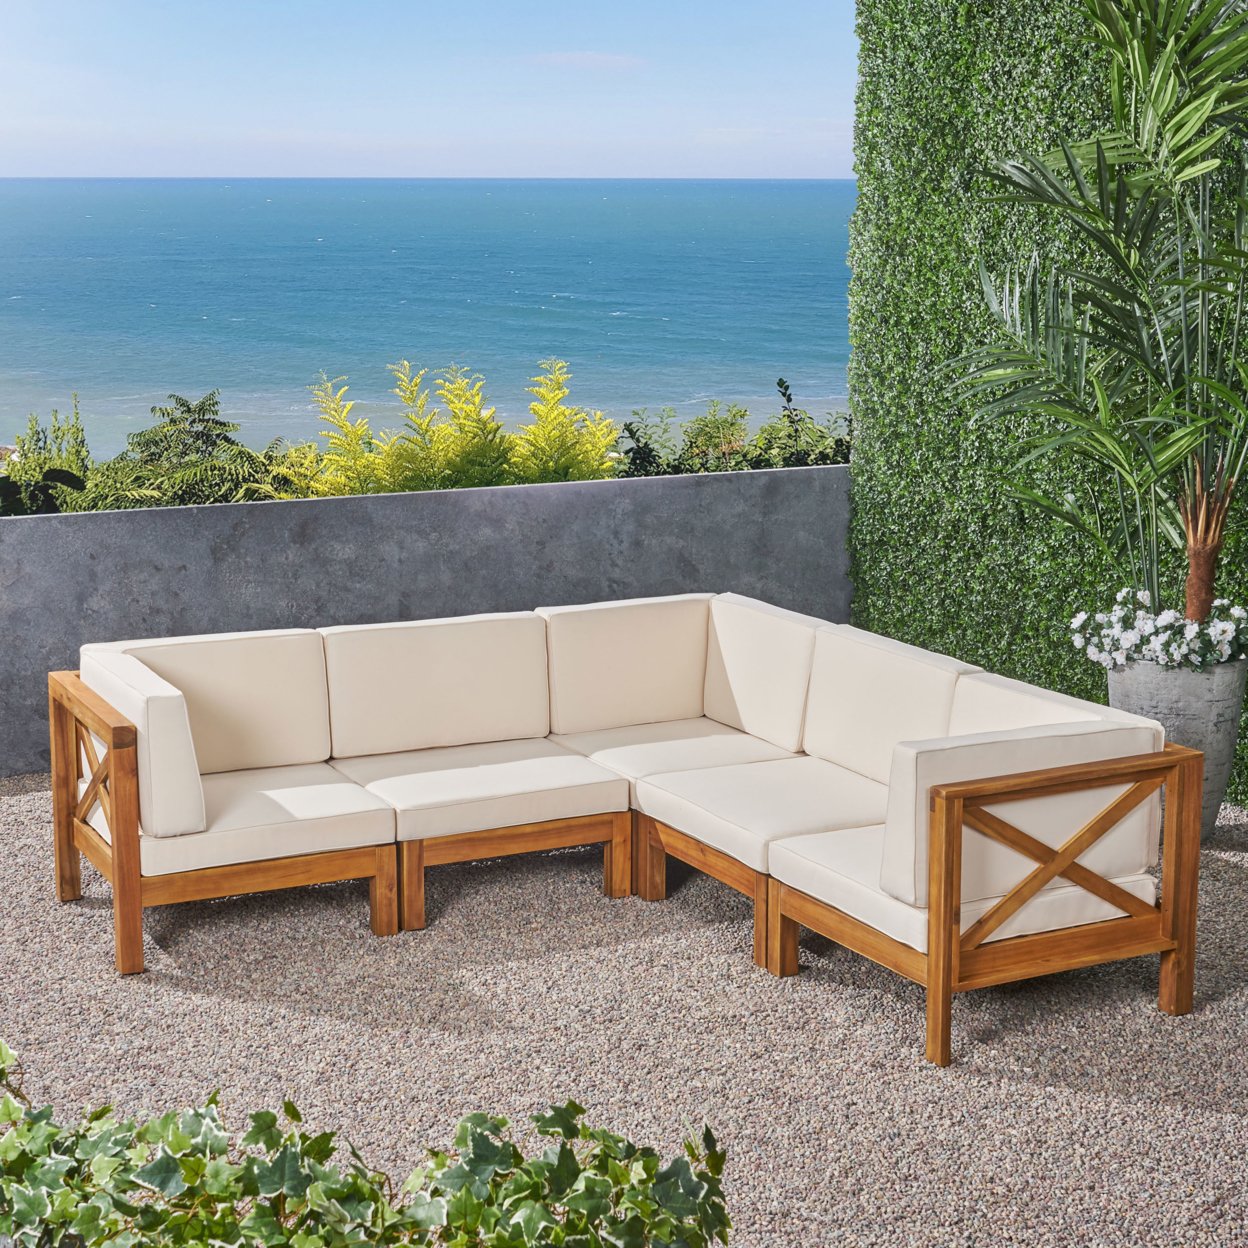 Brava Outdoor Acacia Wood 5 Seater Sectional Sofa Set With Water-Resistant Cushions - Weathered Gray + Dark Gray